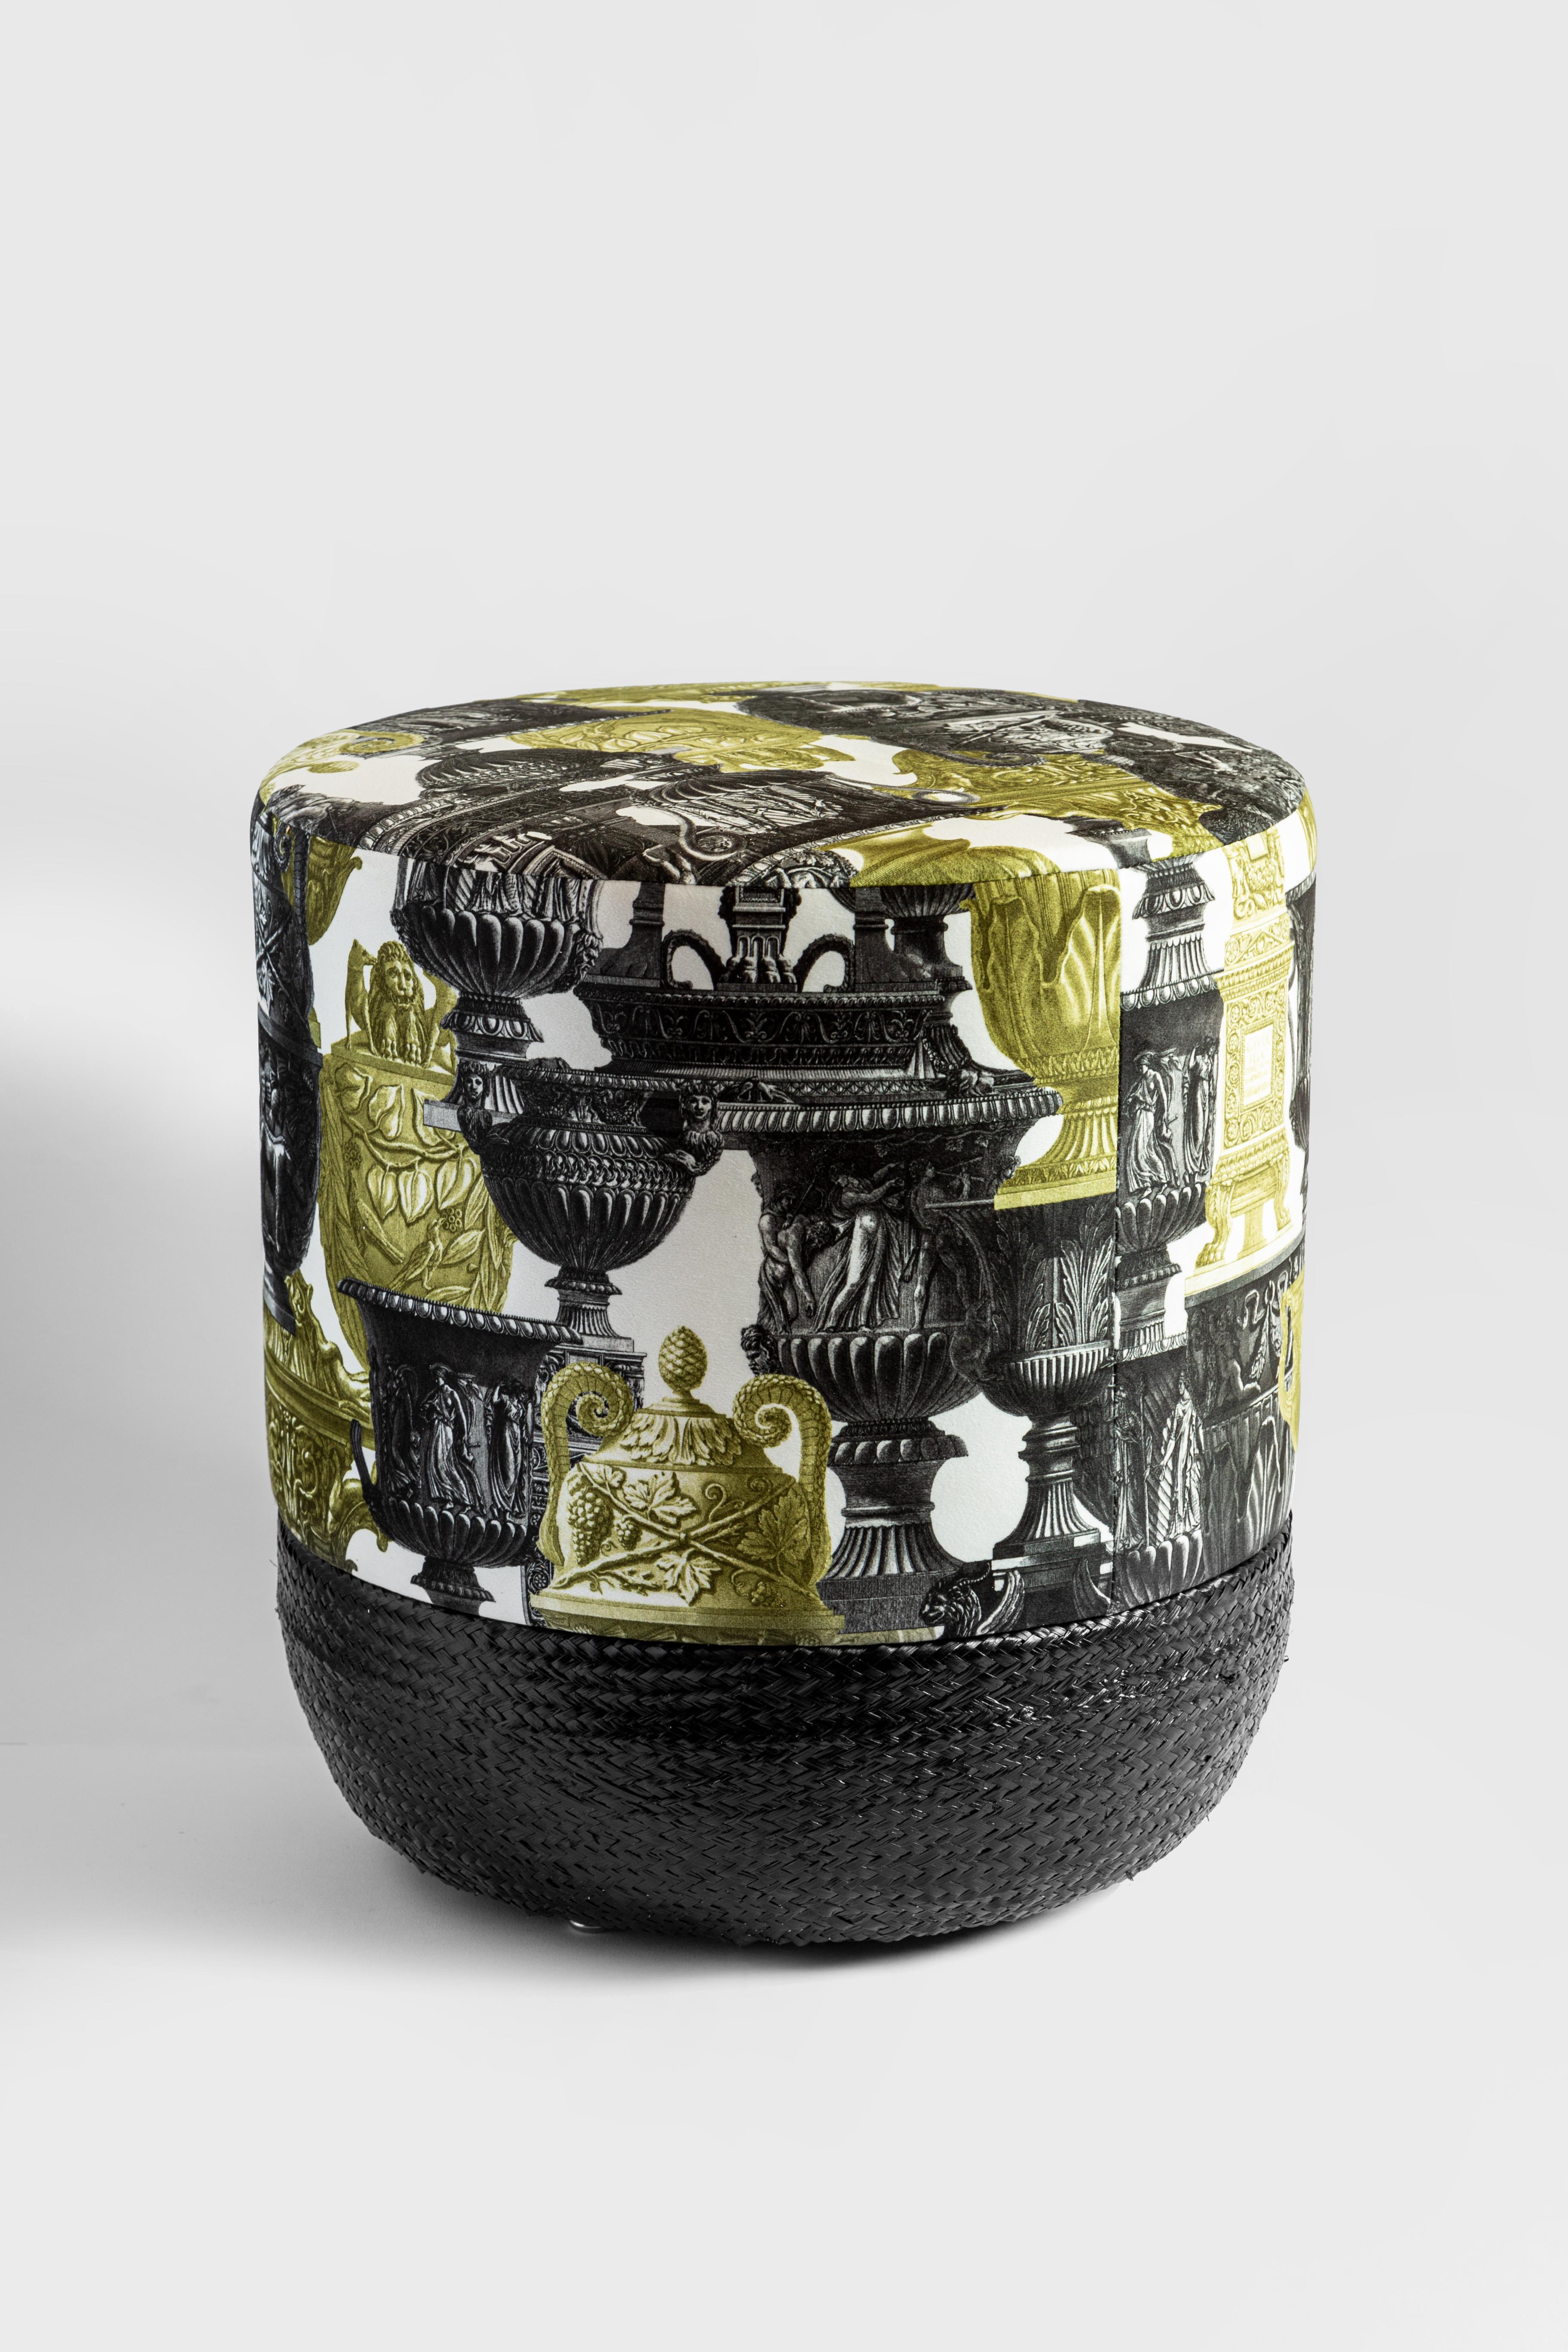 Pouf handmade by Italian expert craftsmen. High quality straw base and printed velvet covering.
The decoration of this model is inspired by ancient Rome and is made up of engravings of ornamental vases.